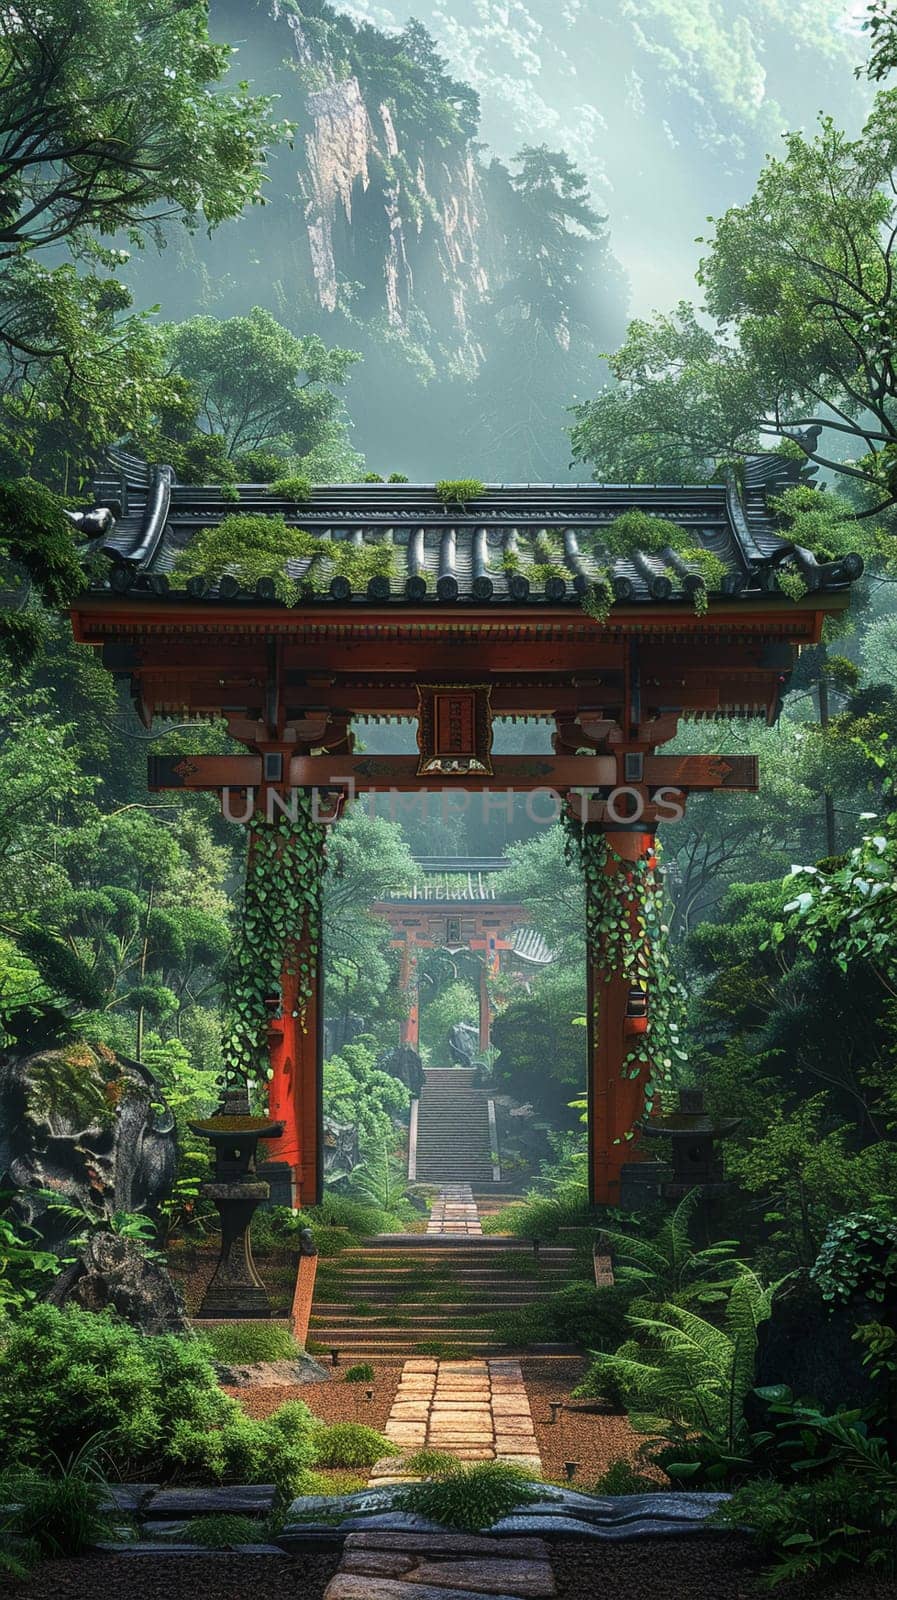 Shinto Shrine Torii Gate Framing a Peaceful Forest, The traditional structure blends with nature, signifying a sacred entrance.